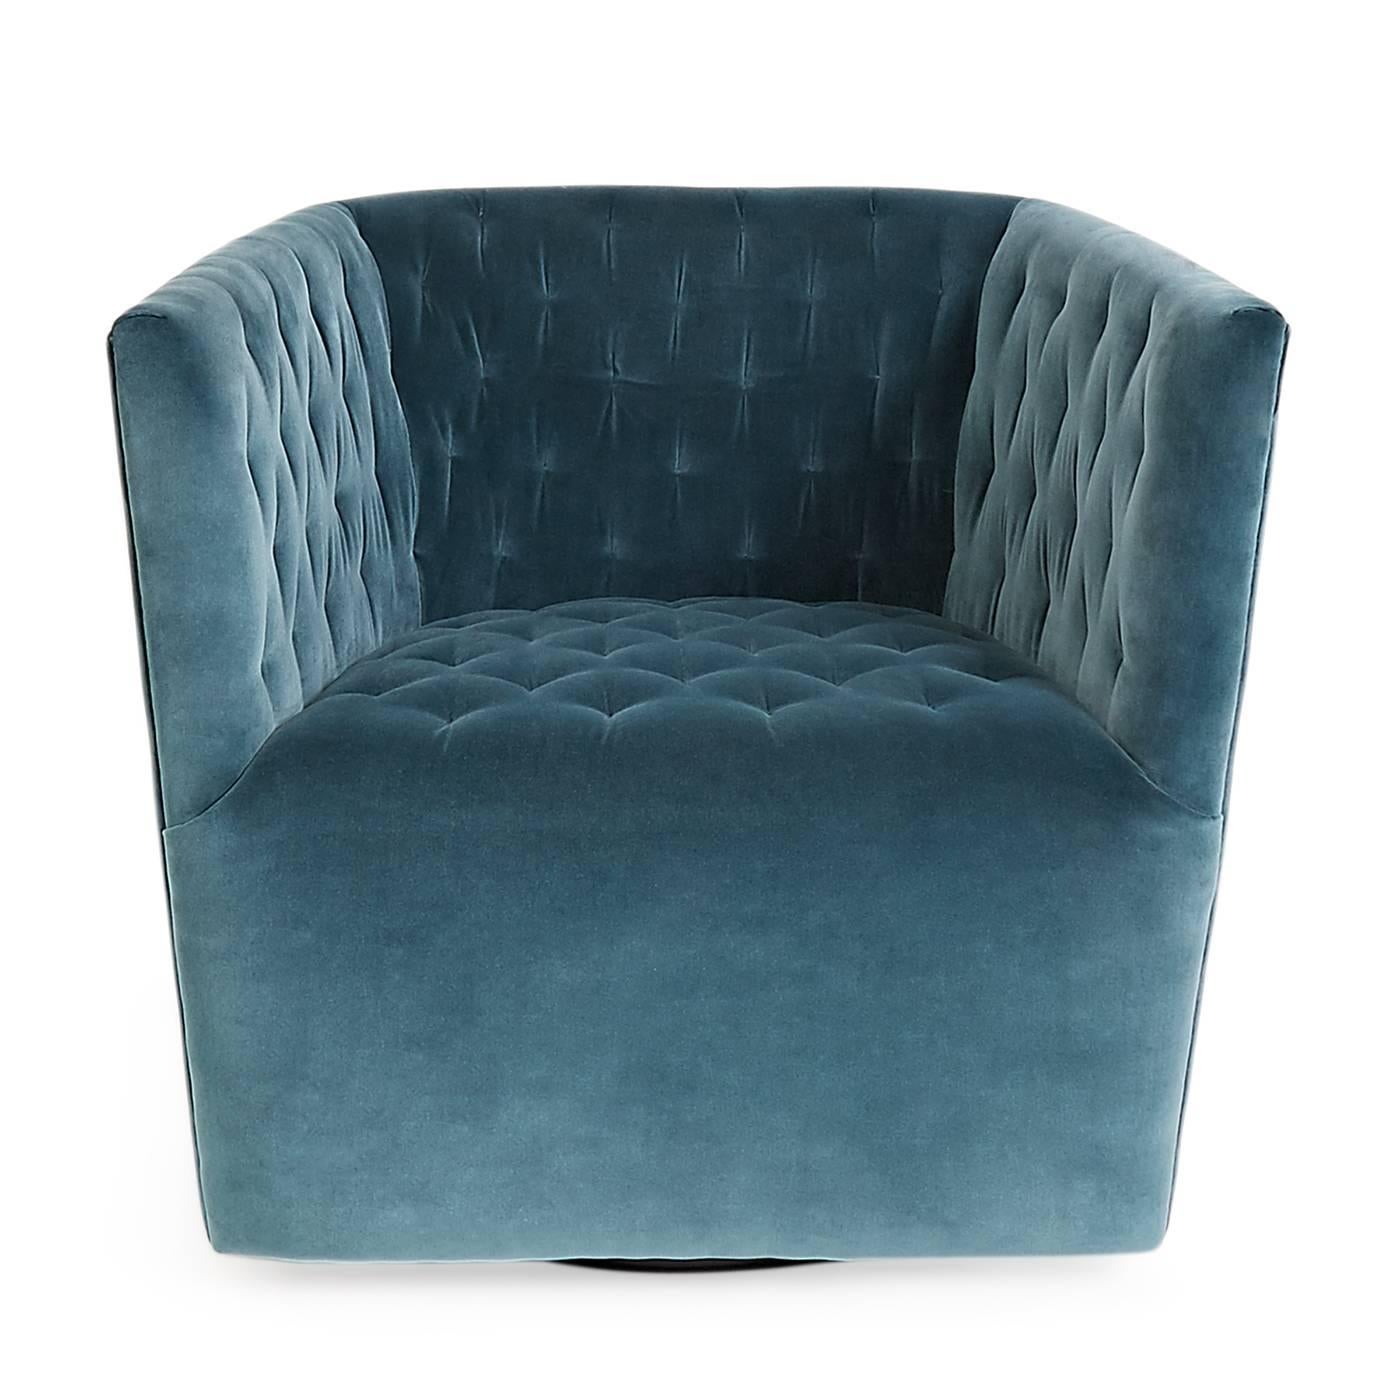 Swivel in style. Cocoon-like form with nifty tufting detail upholstered in rich petrol velvet. Demure in scale but powerful in presence, the Vertigo swivel chair is our modern interpretation of a classic barrel club chair. Works beautifully as a